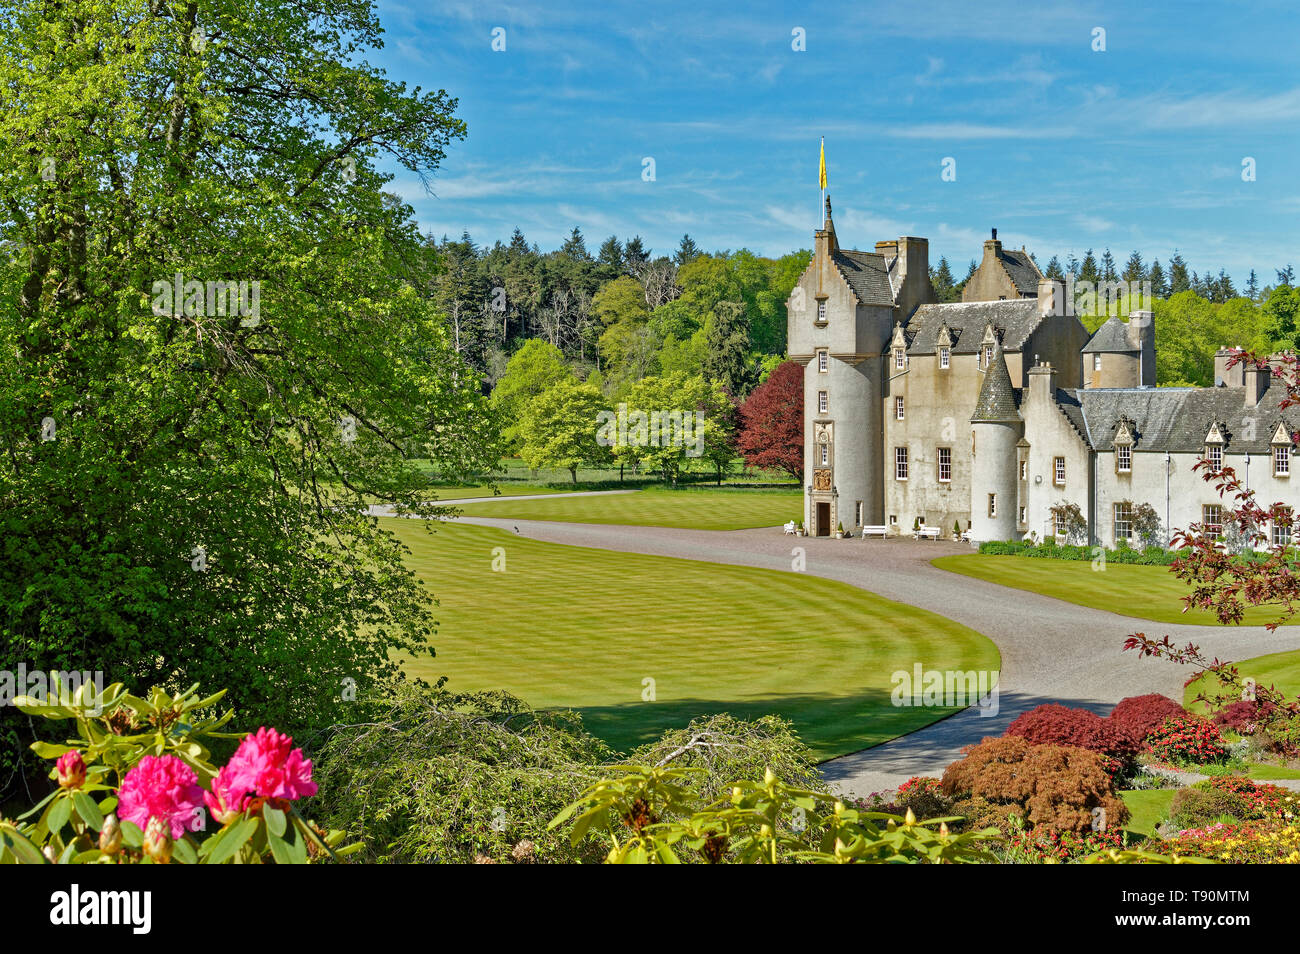 BALLINDALLOCH CASTLE BANFFSHIRE SCOTLAND THE  GARDENS WITH COLOURFUL RED RHODODENDRON FLOWERS Stock Photo